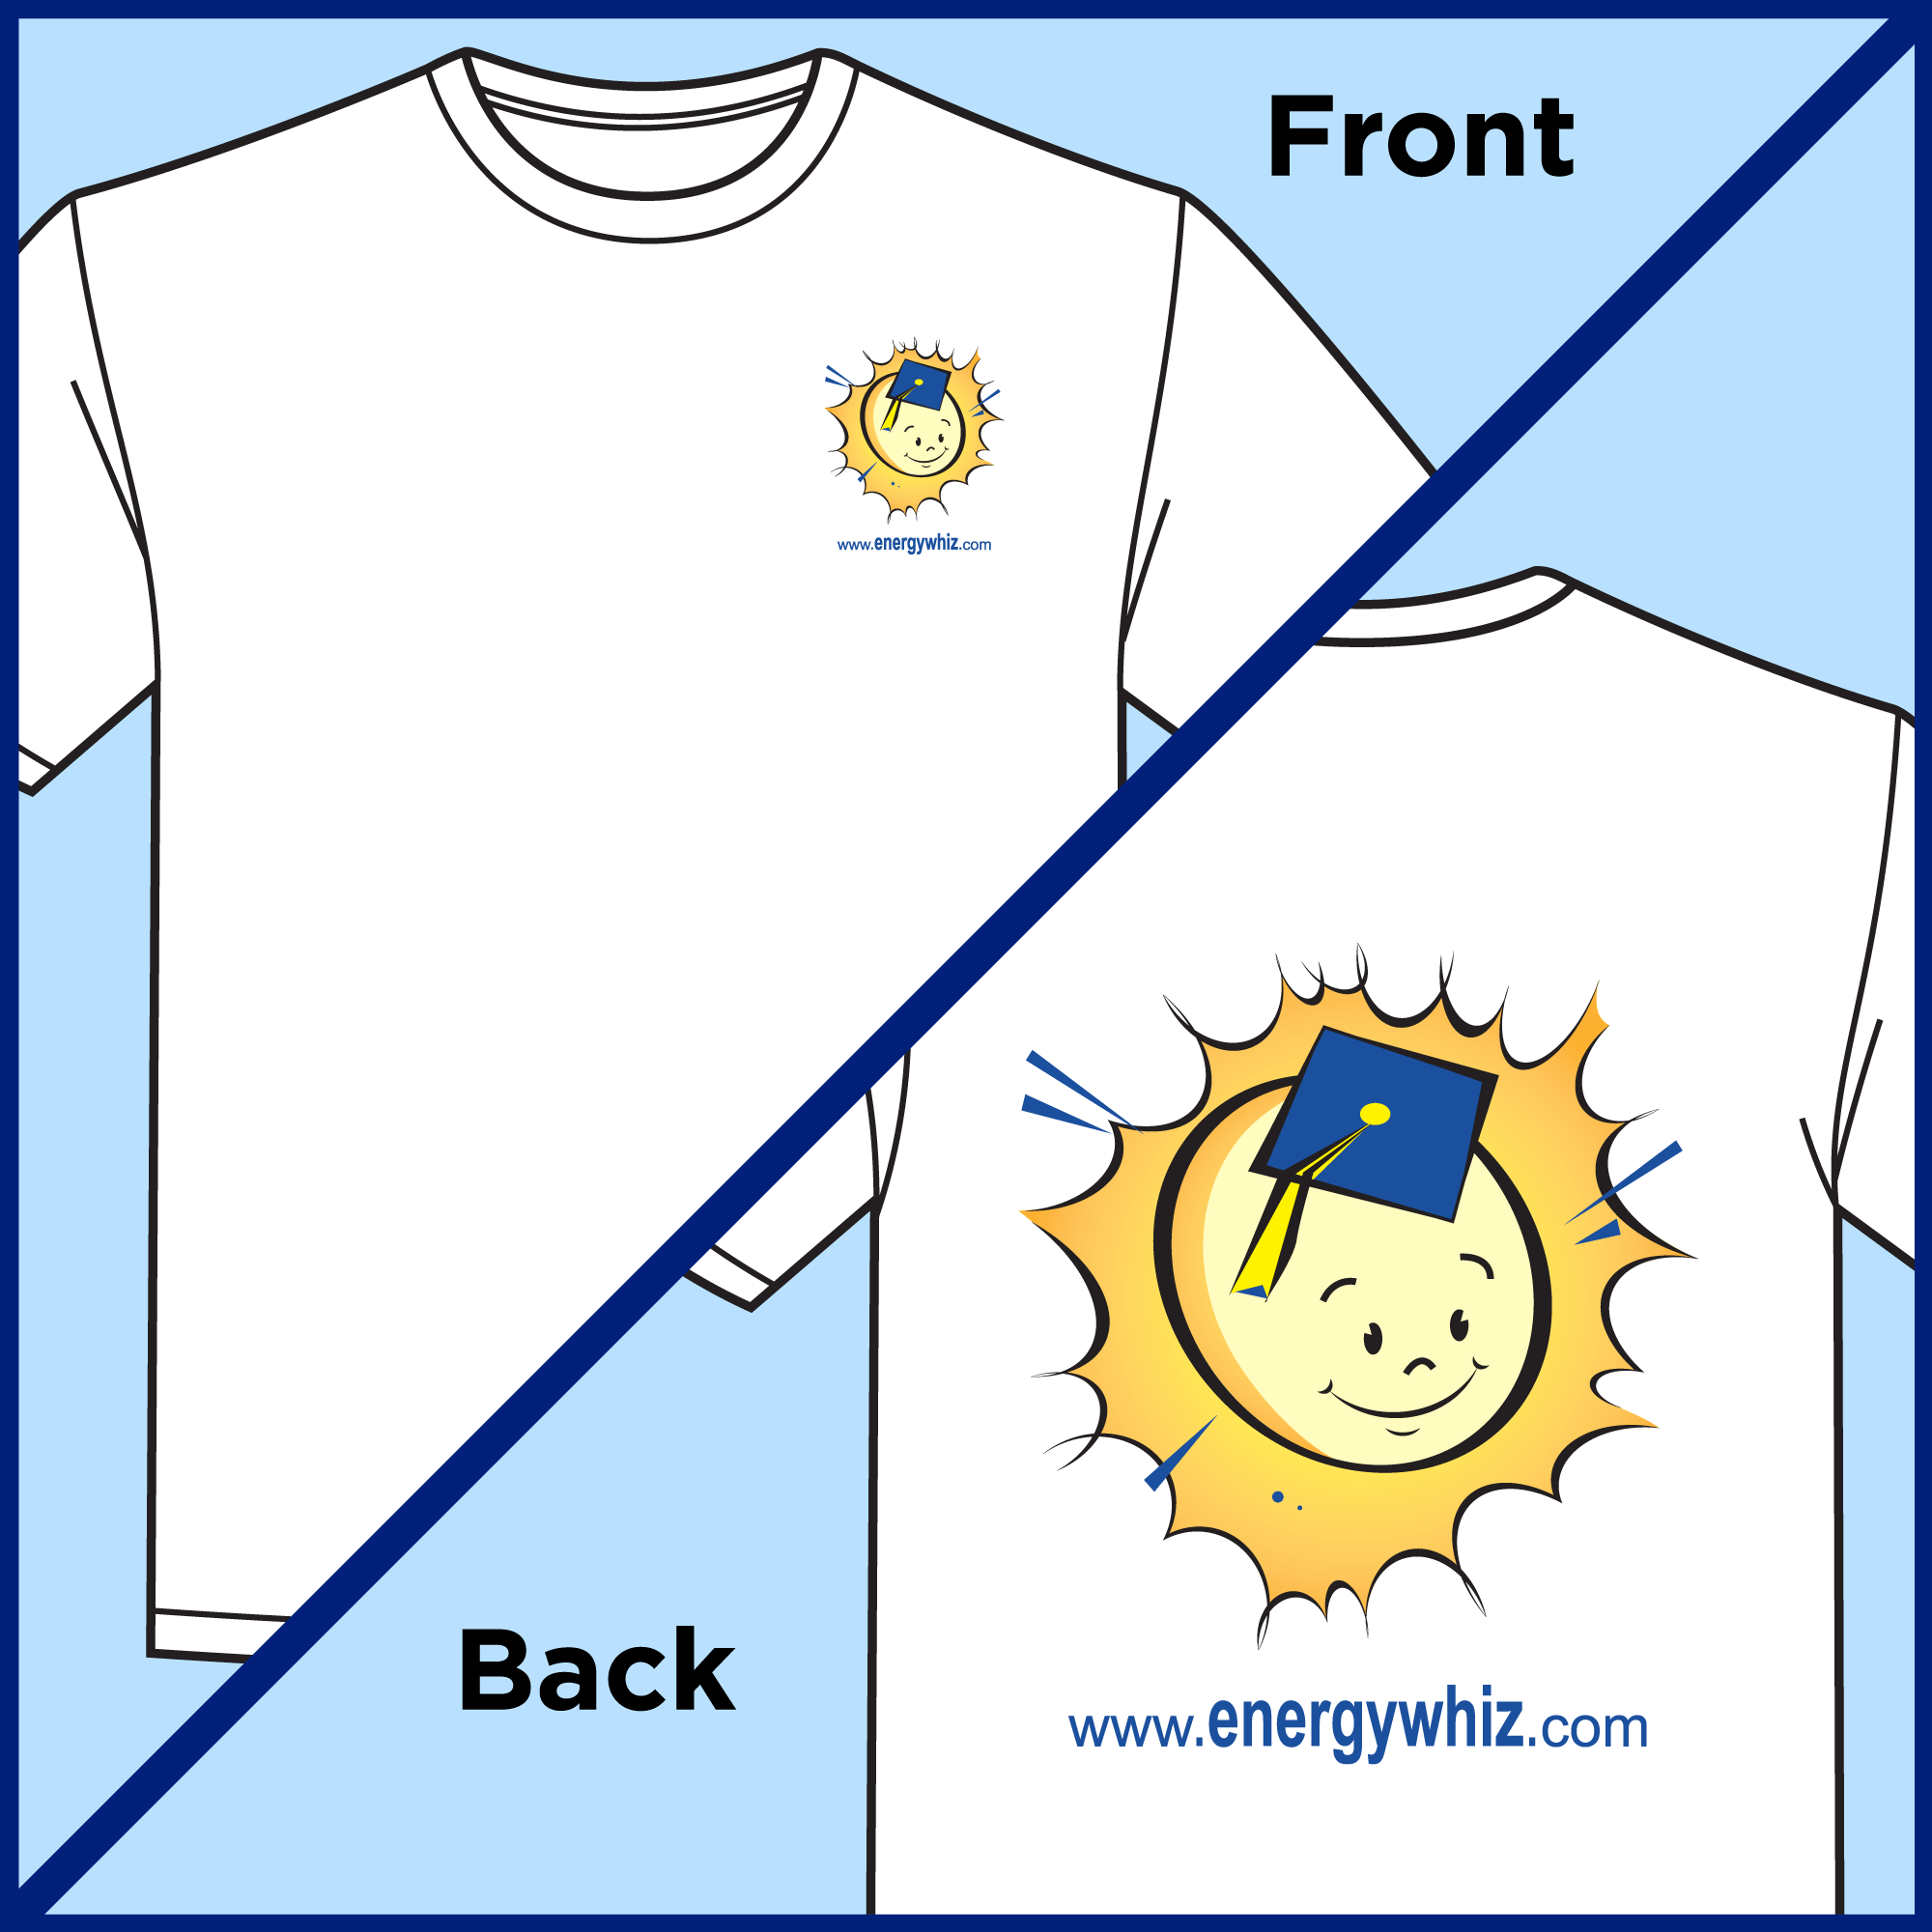 energywhiz.com t-shirt front and back